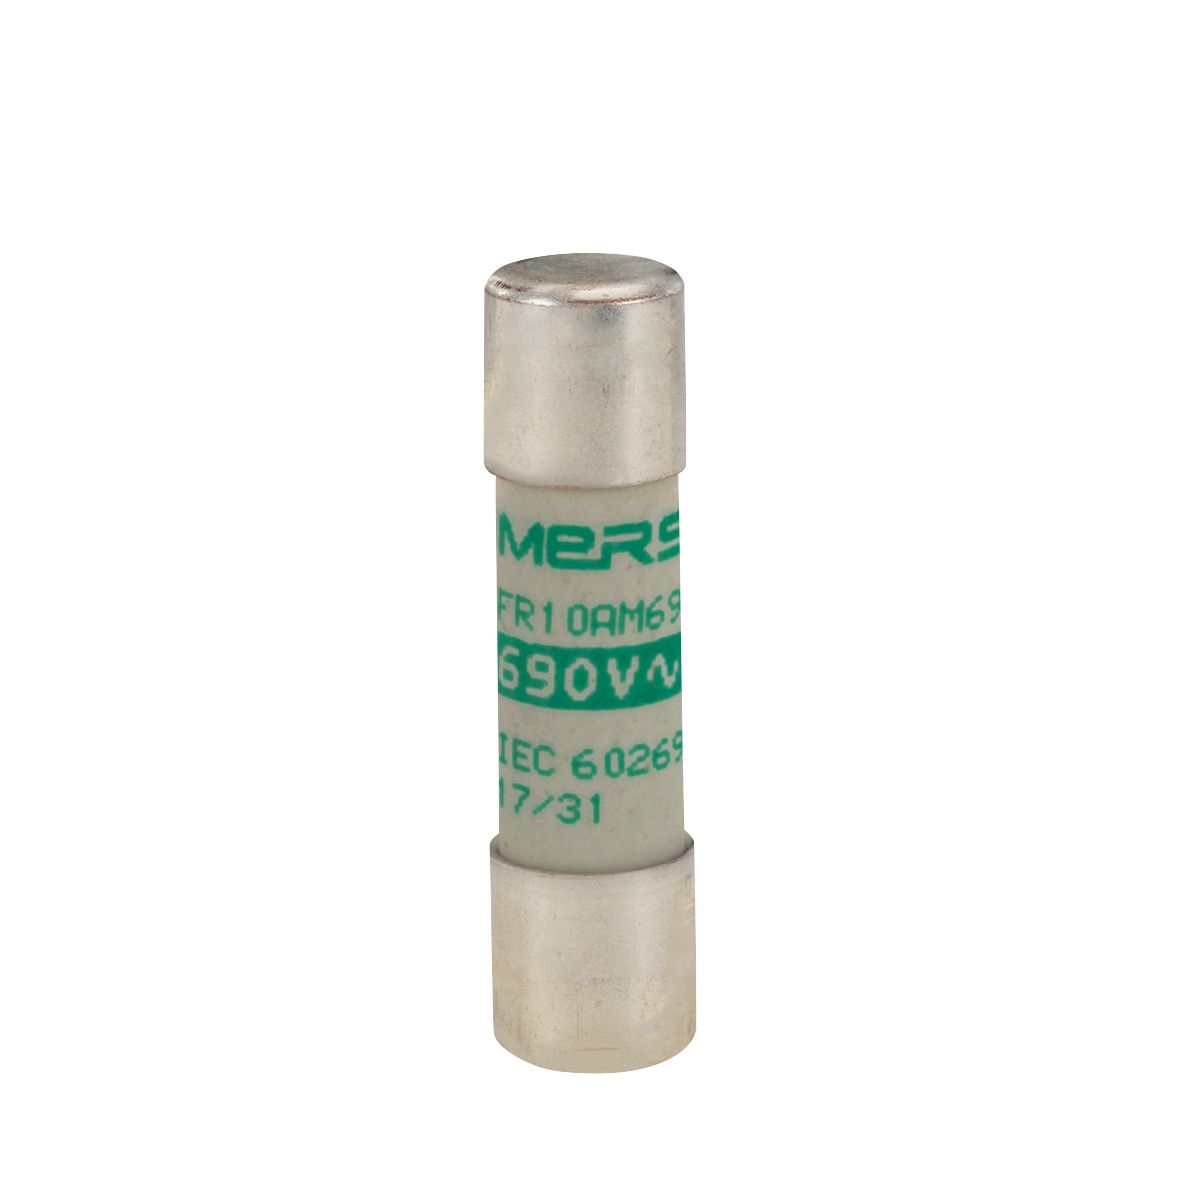 P302785 - Cylindrical fuse-link aM 690VAC 10.3x38, 12A